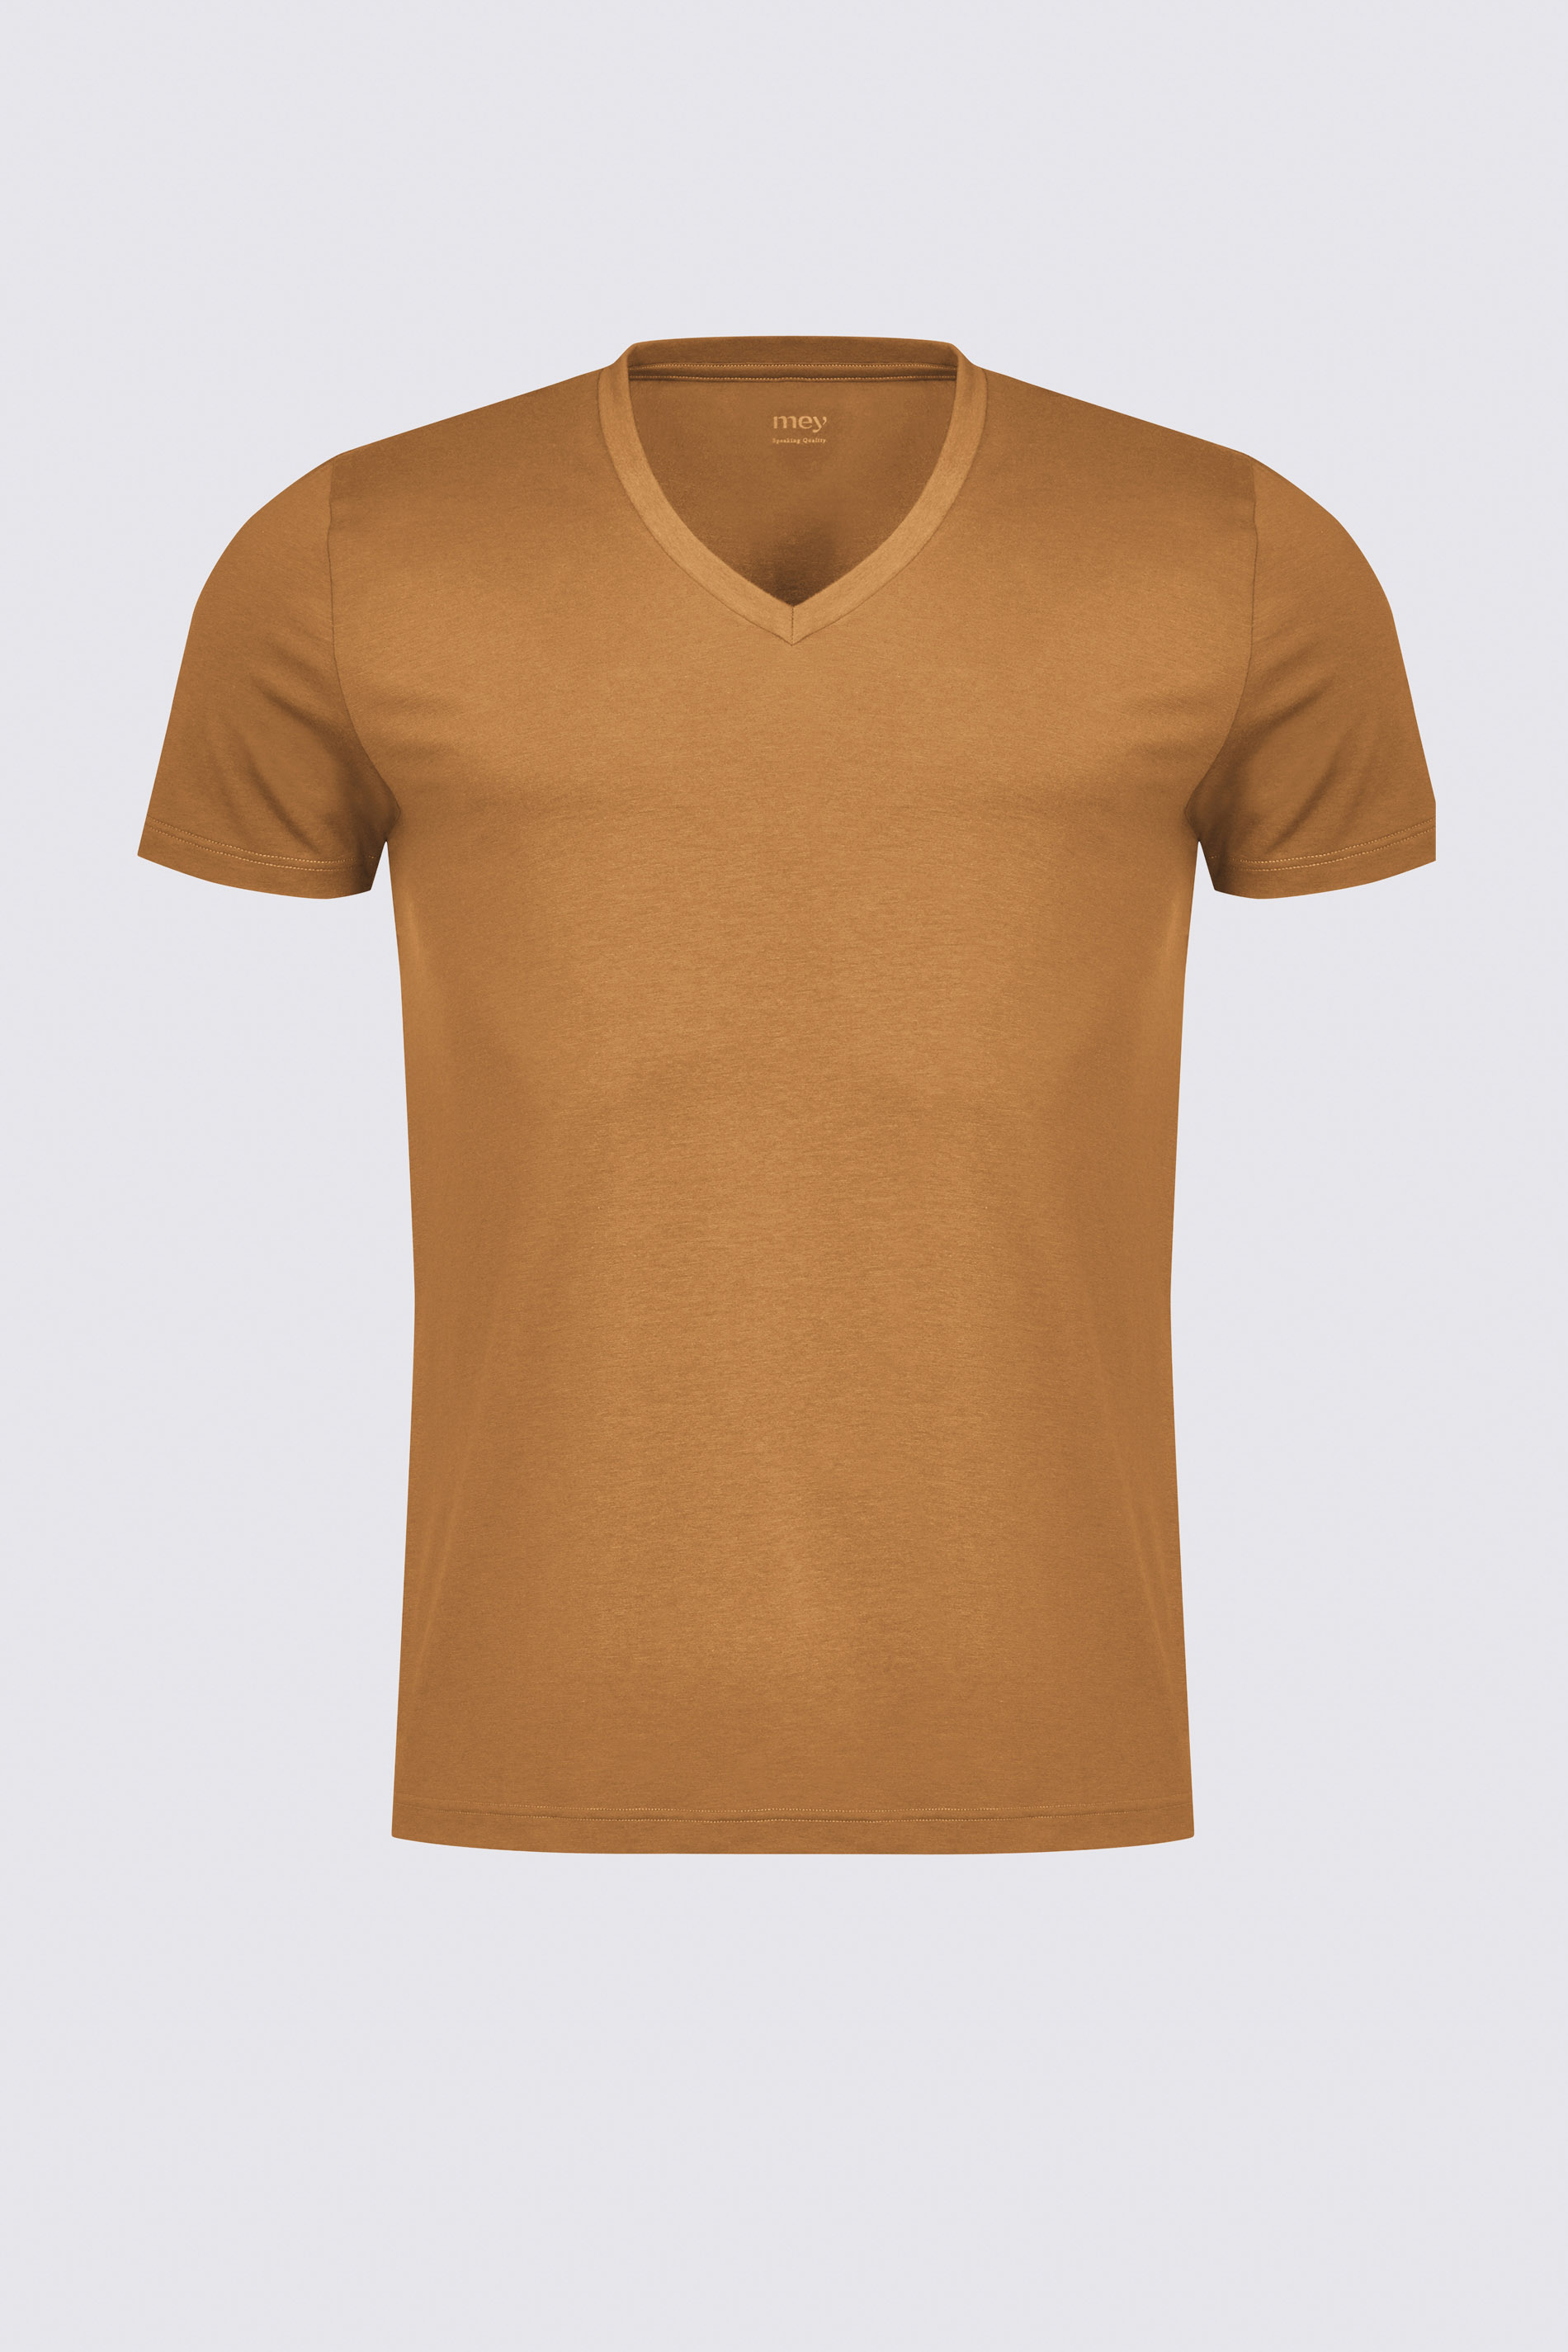 V-neck Brown Toffee Dry Cotton Colour Cut Out | mey®